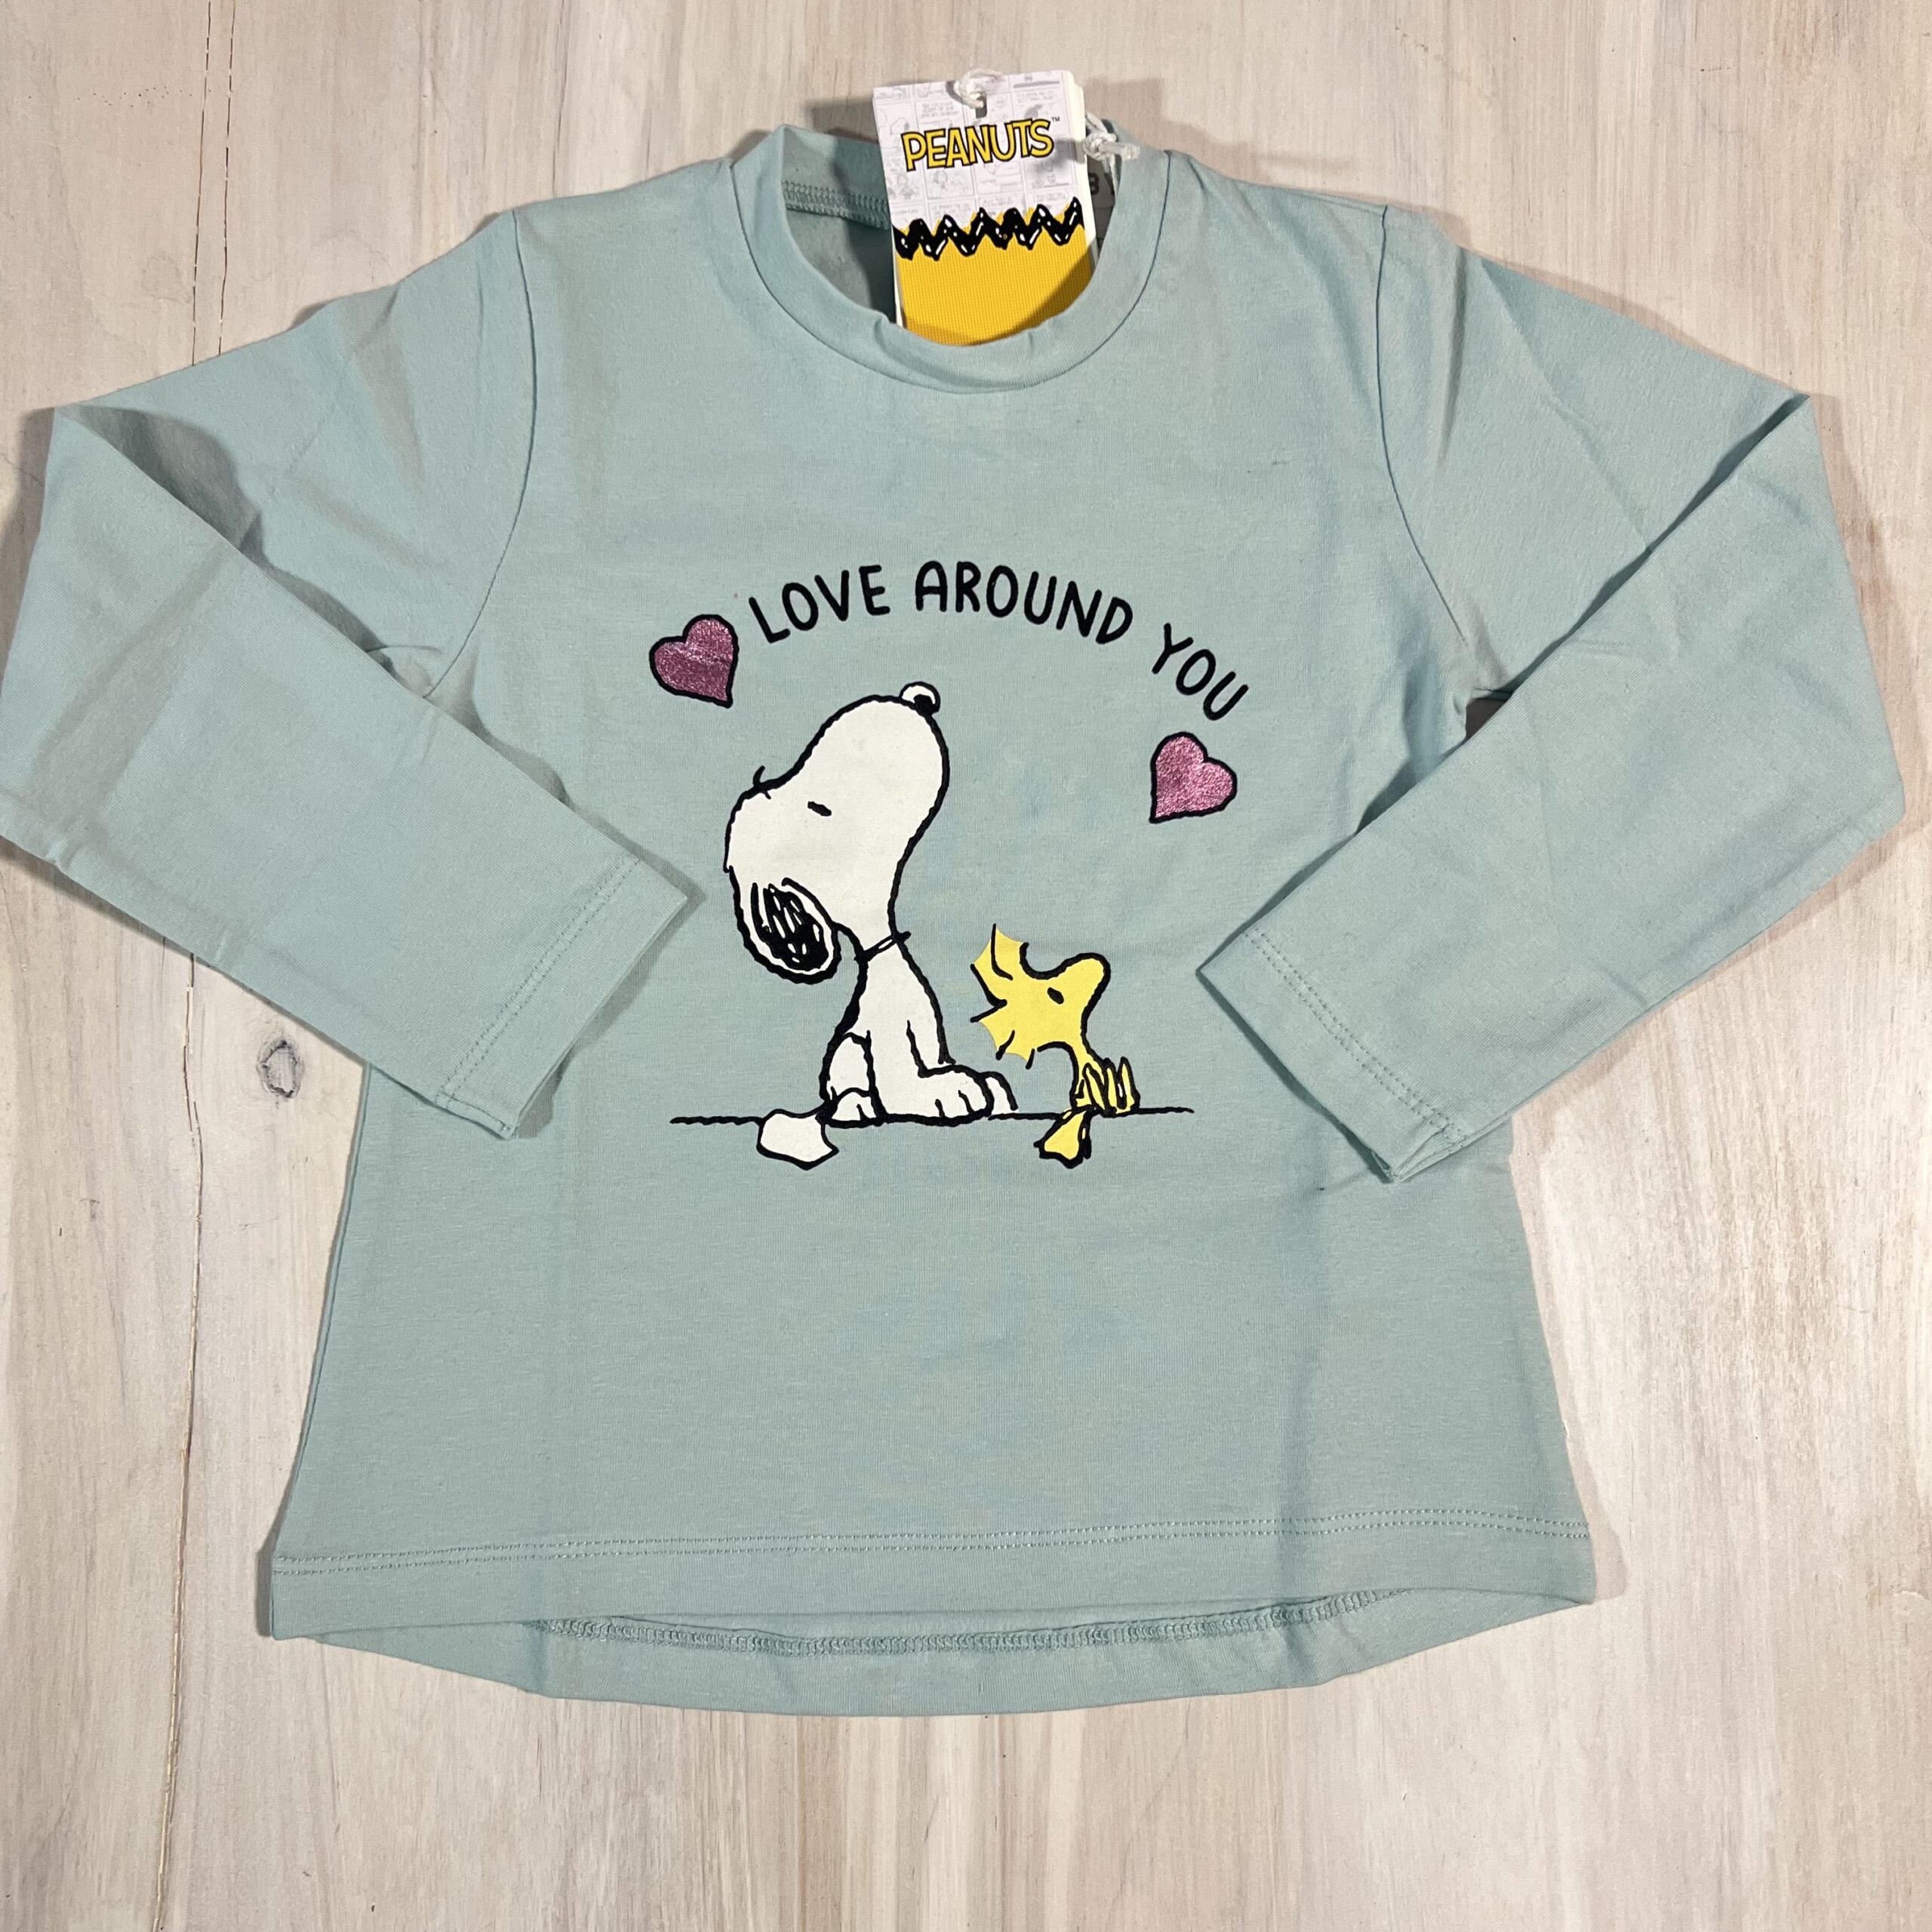 t-shirt-manica-lunga-verde-menta-snoopy-cotone-melby-peanuts